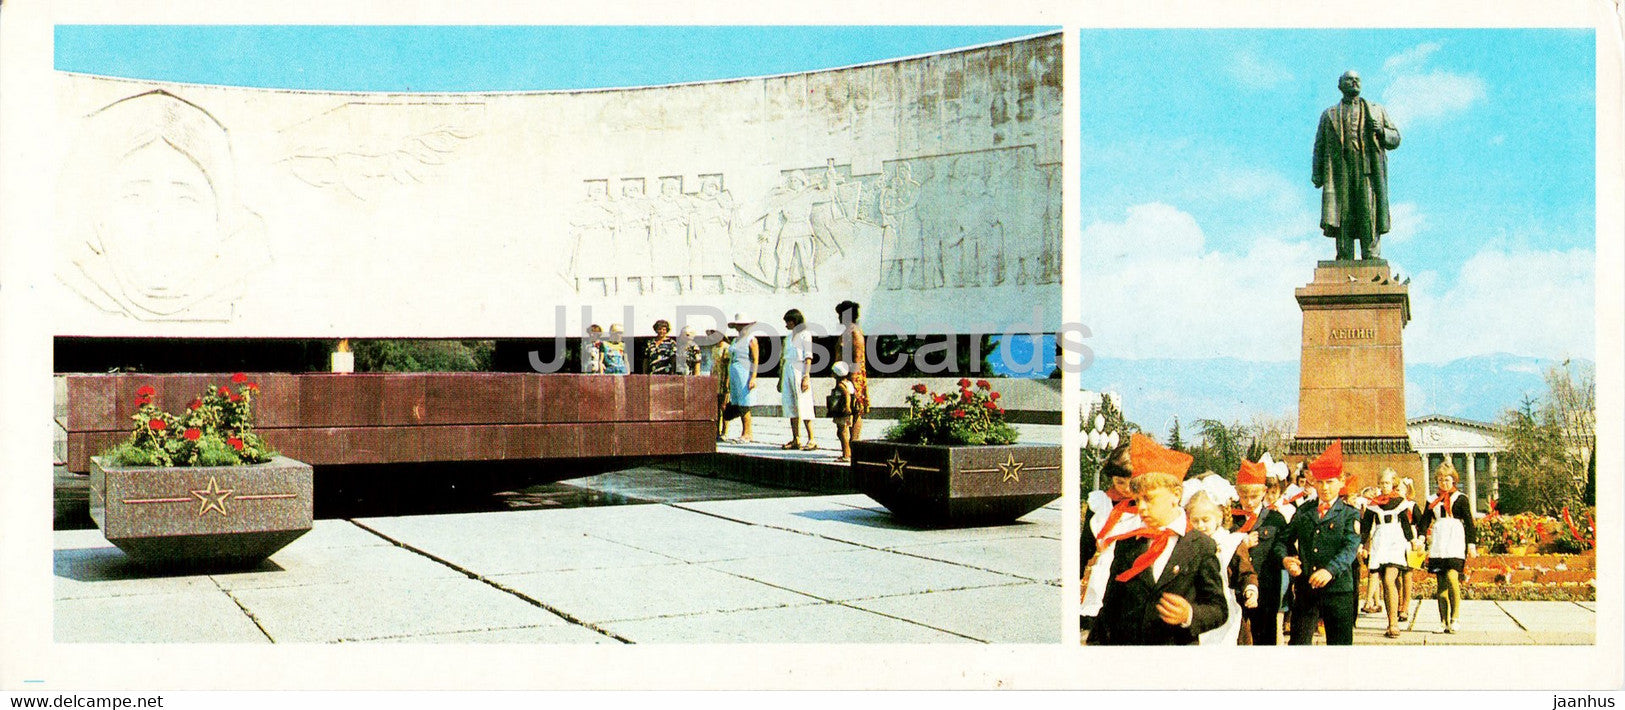 Yalta - Memorial to the Heroes of the Civil War on Glory Hill - monument to Lenin Crimea - 1985 - Ukraine USSR - unused - JH Postcards